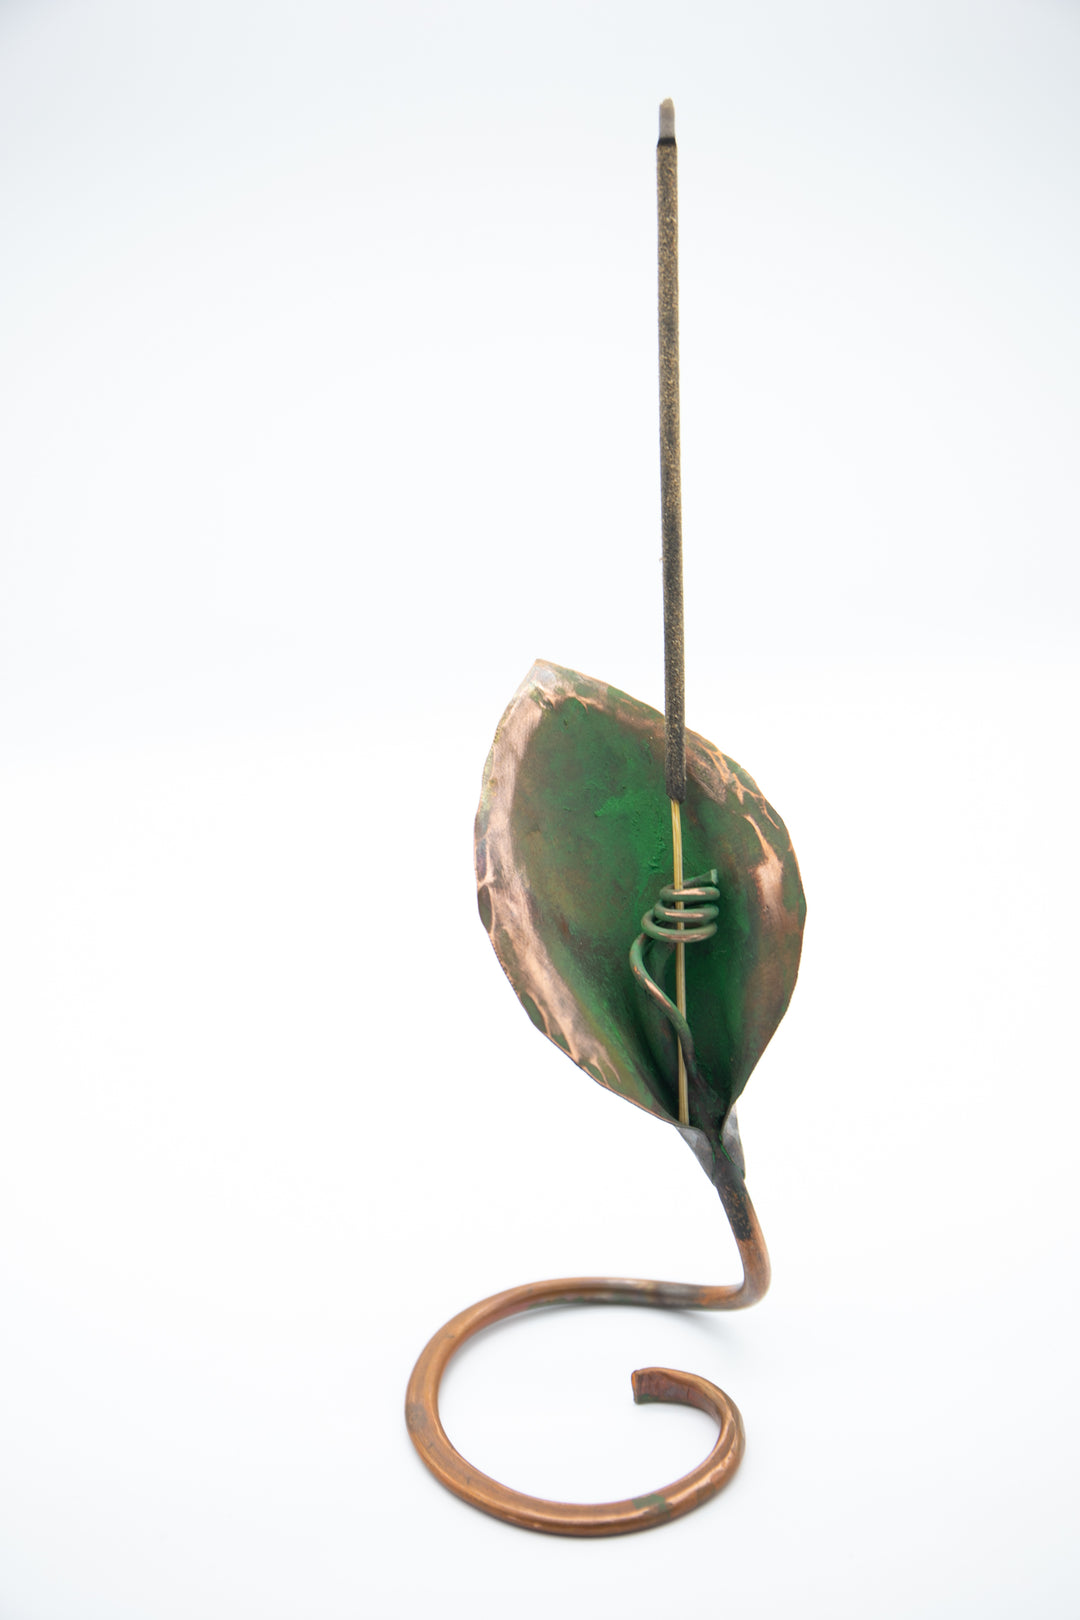 Incense Holder - Handmade Recycled Copper Lily Leaf